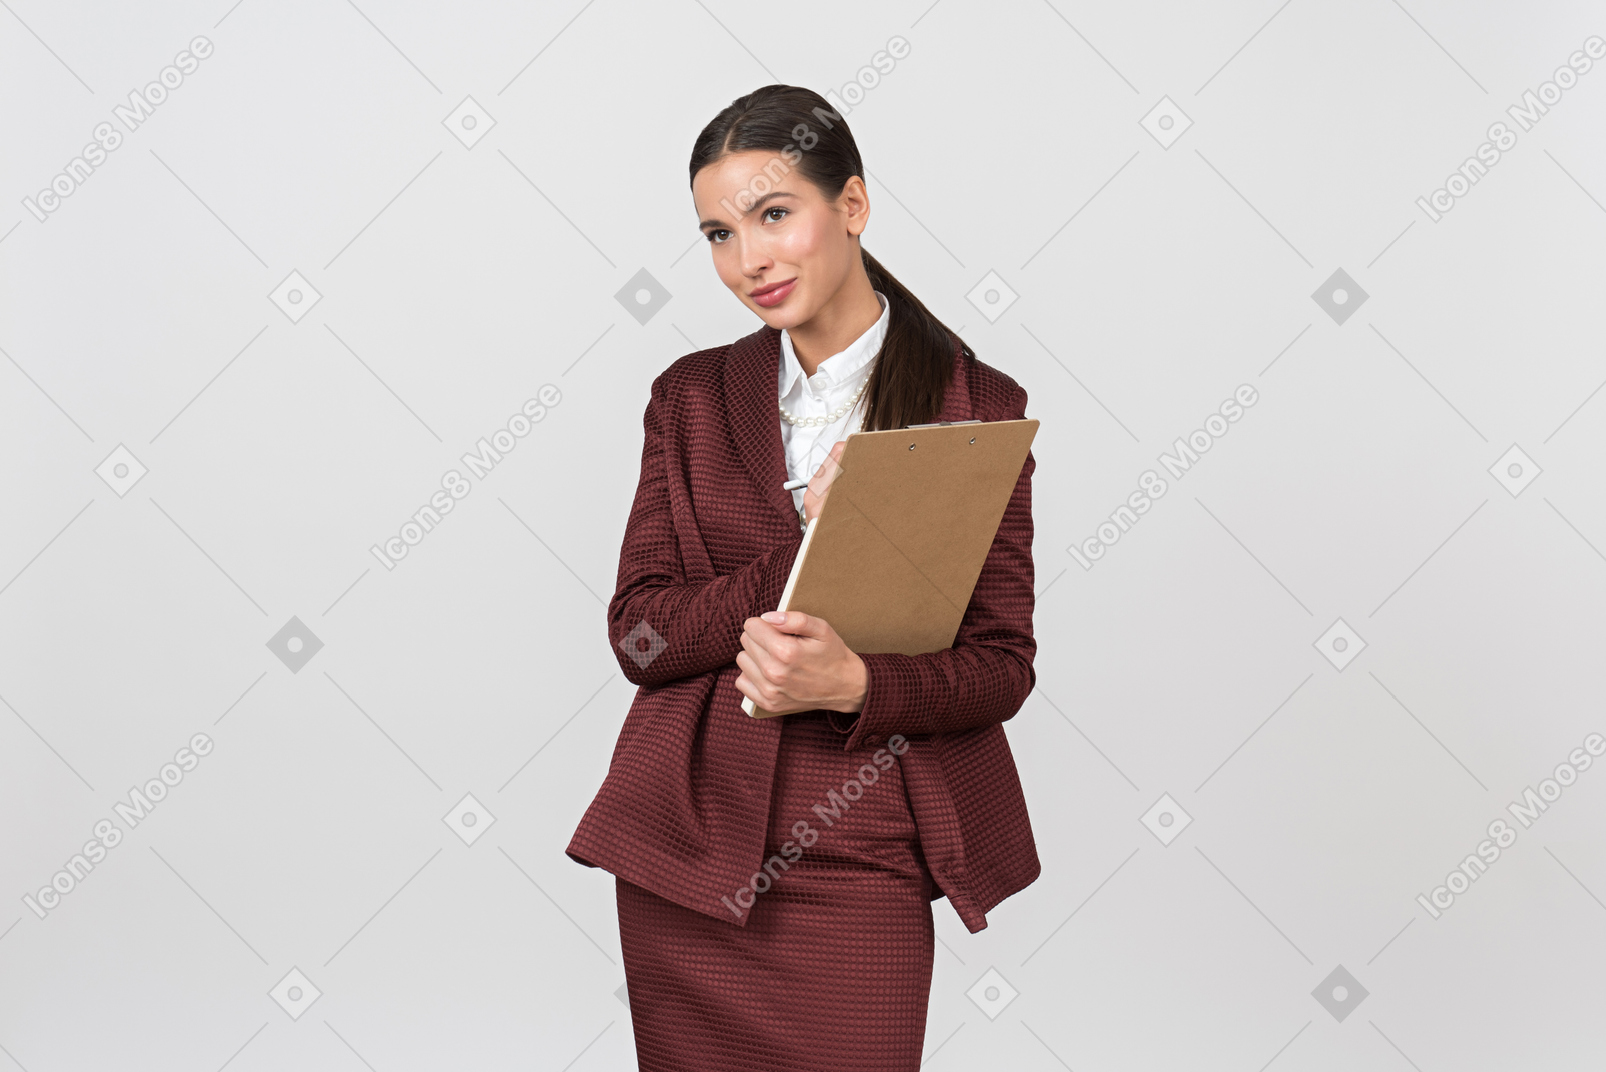 Attractive formally dressed woman taking notes on a clipboard